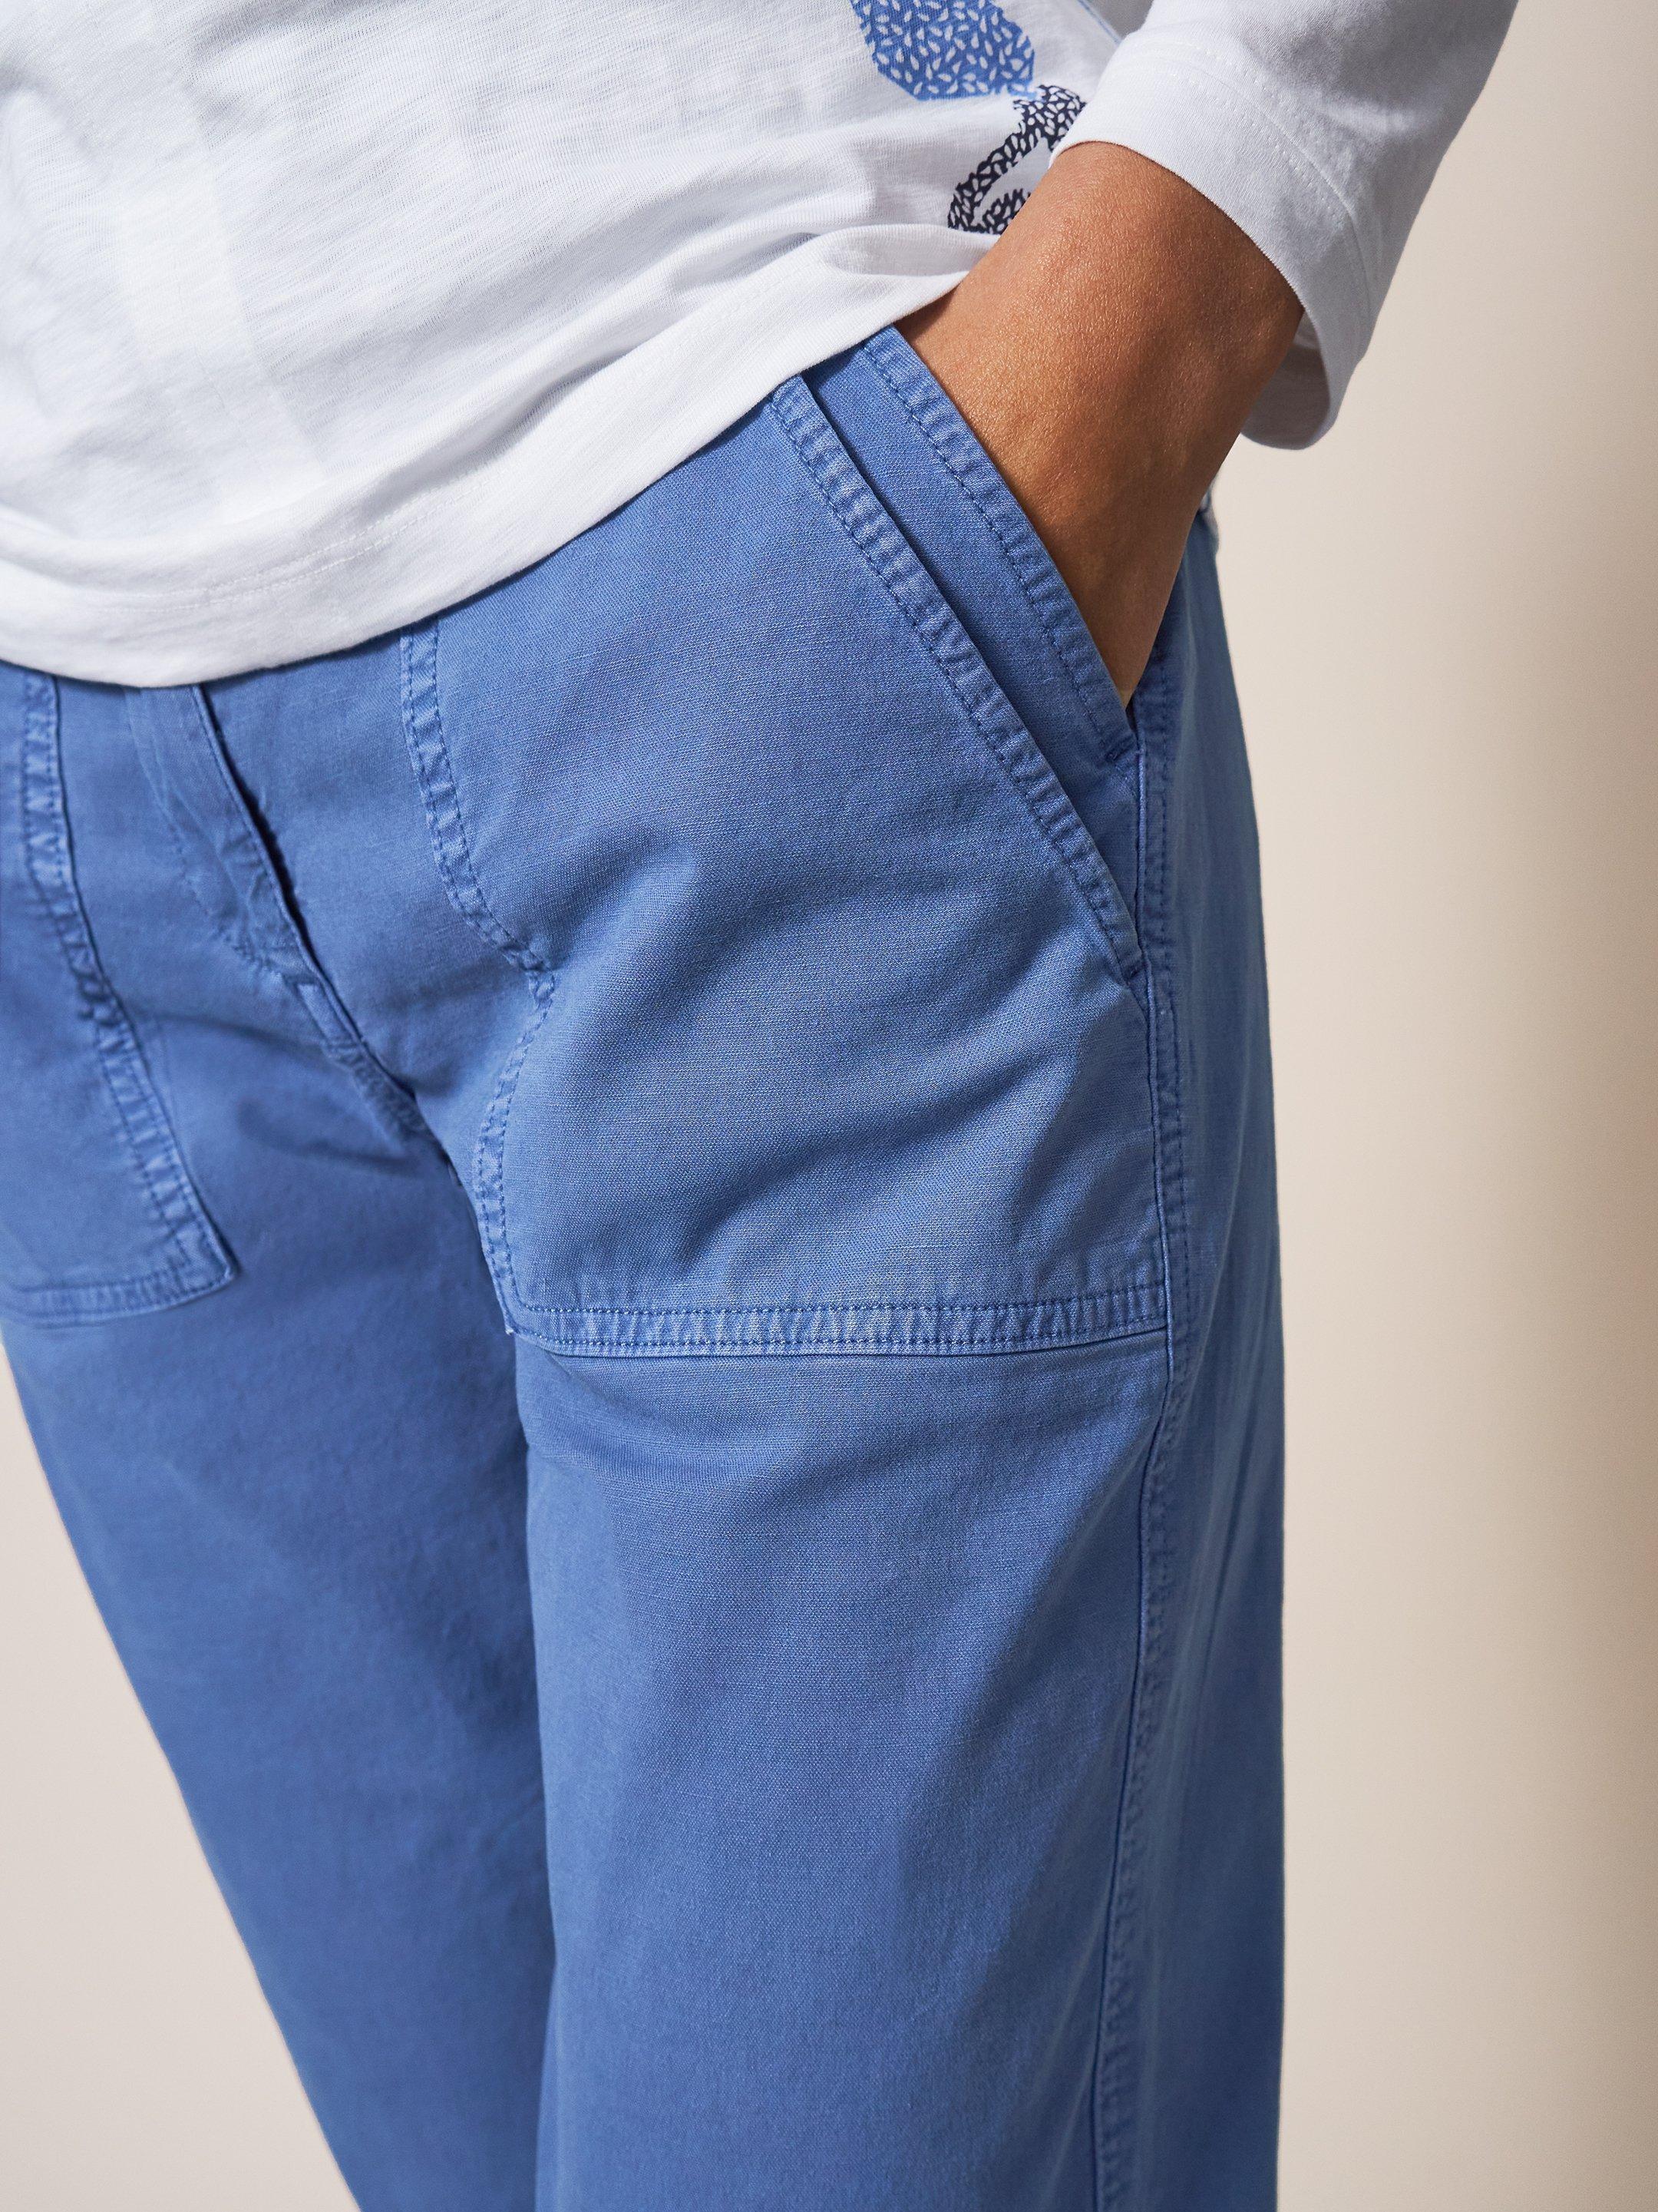 Twister Chino in MID BLUE - MODEL DETAIL